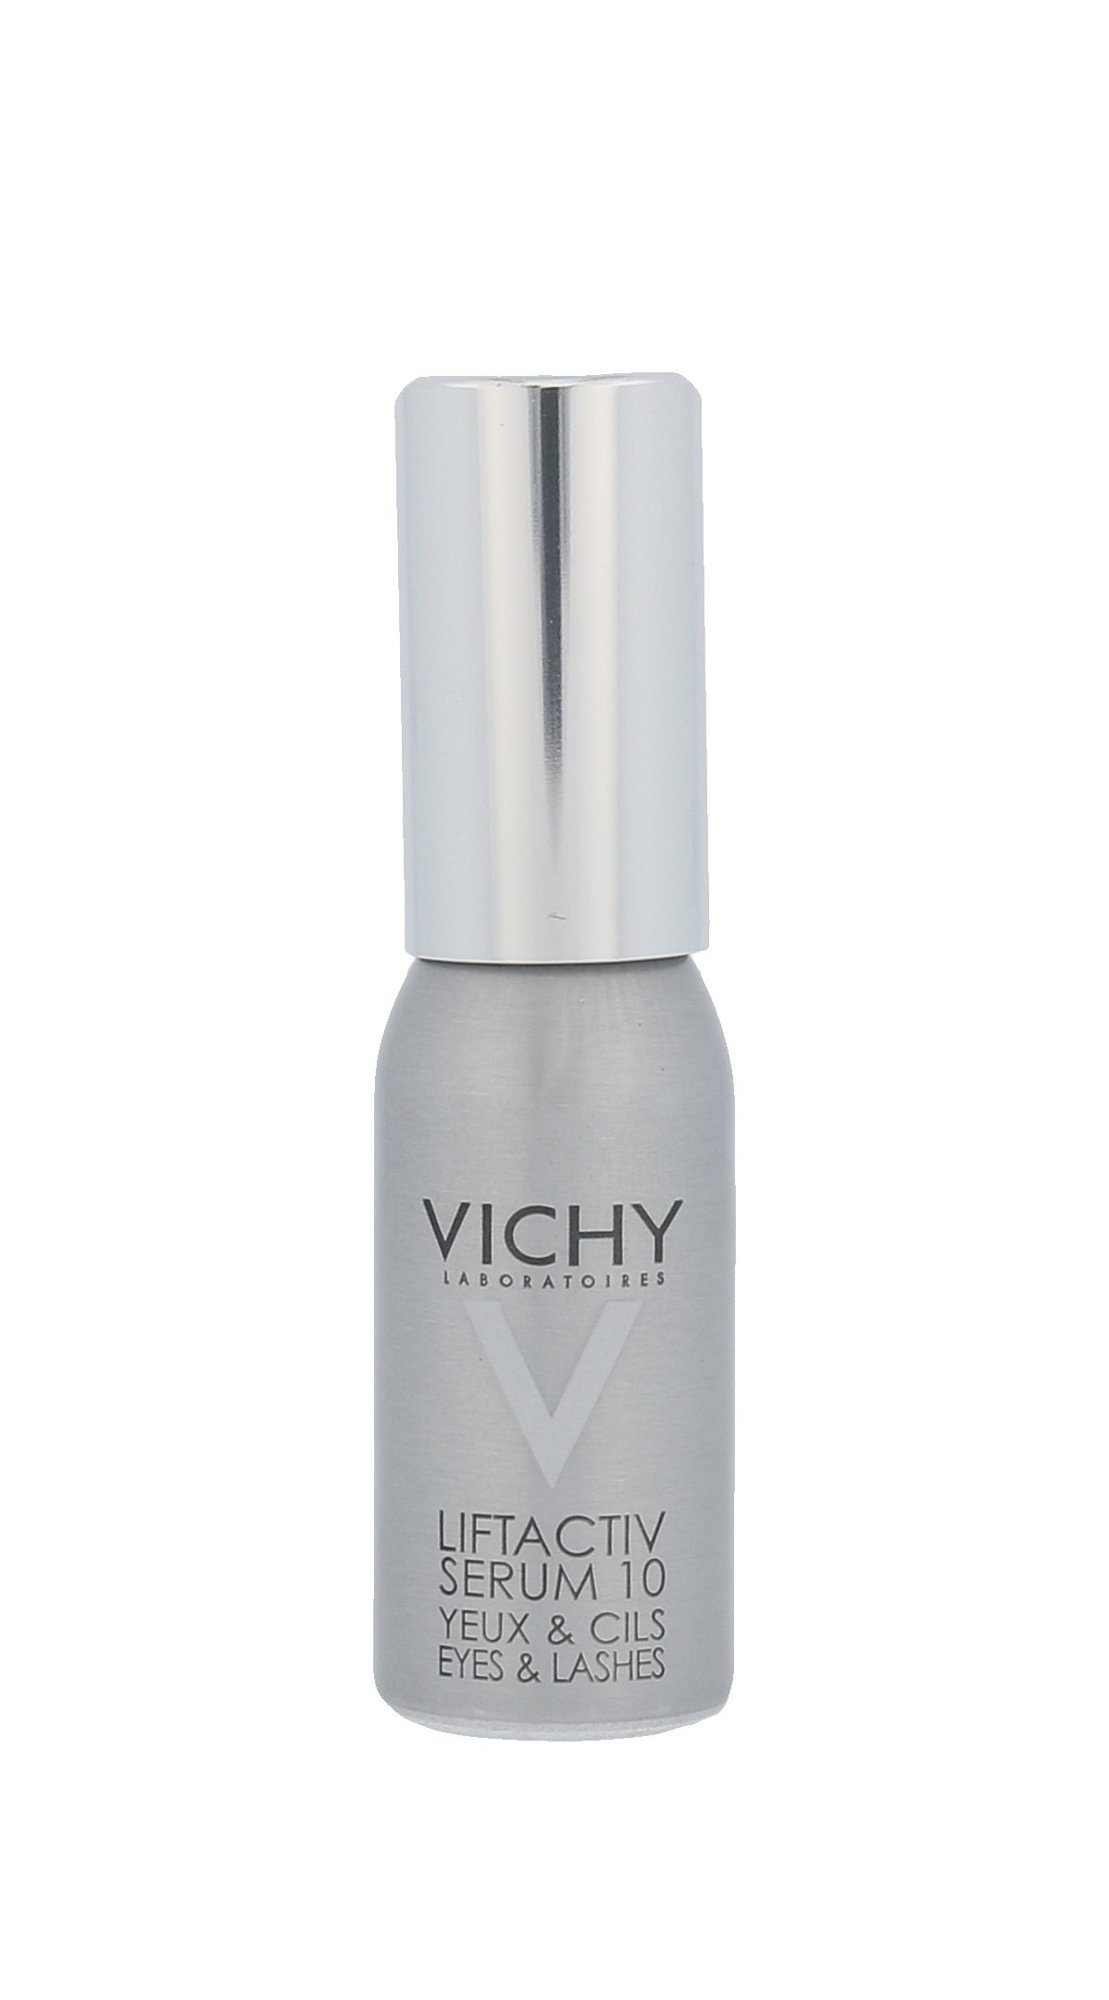 Vichy Liftactiv Serum 10 Yeux And Cils